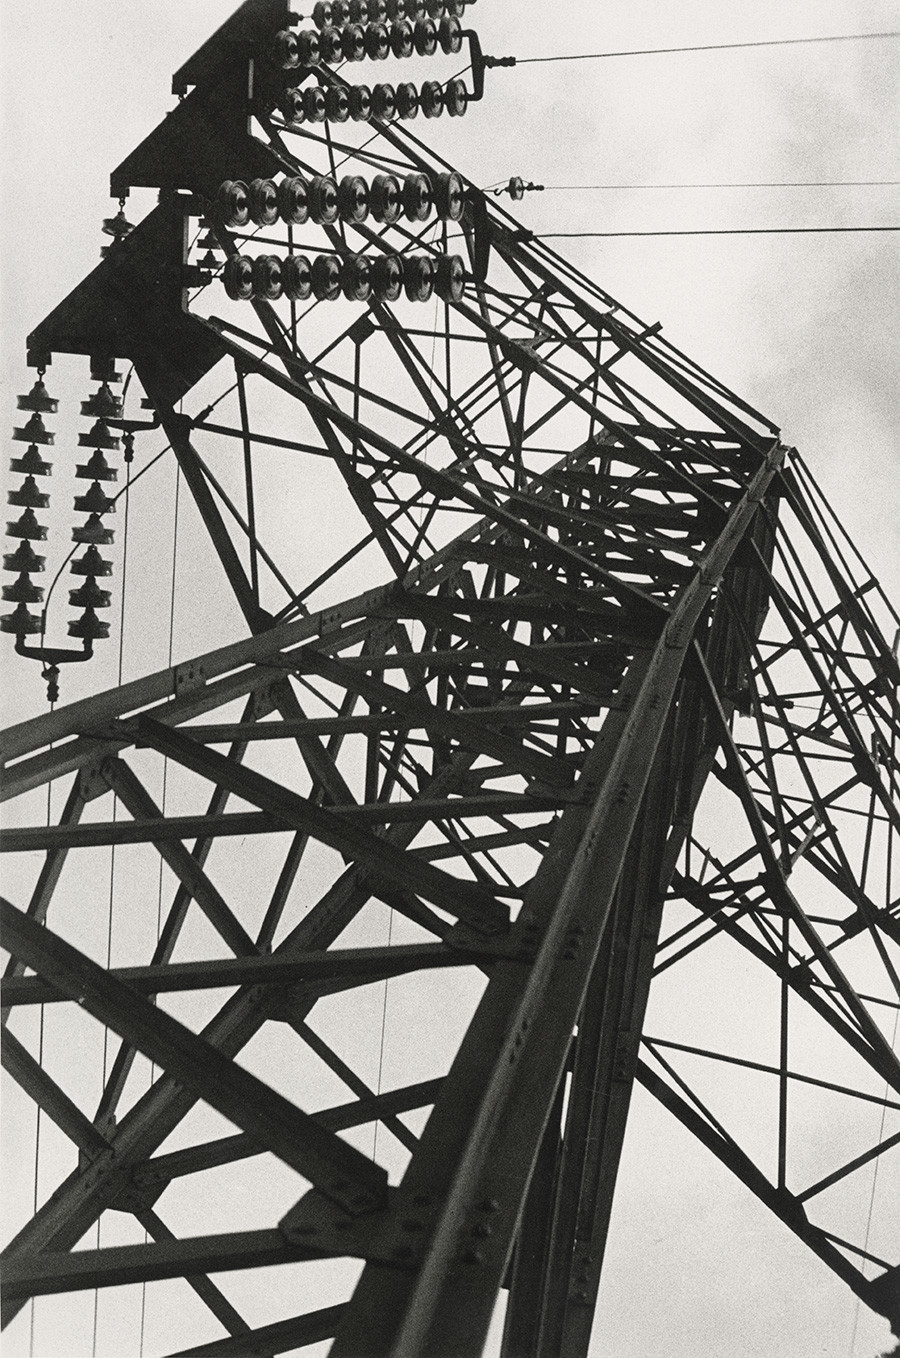 Power line mast in Moscow, 1929. Photograph by Alexander Rodchenko from the Multimedia Art Museum collection